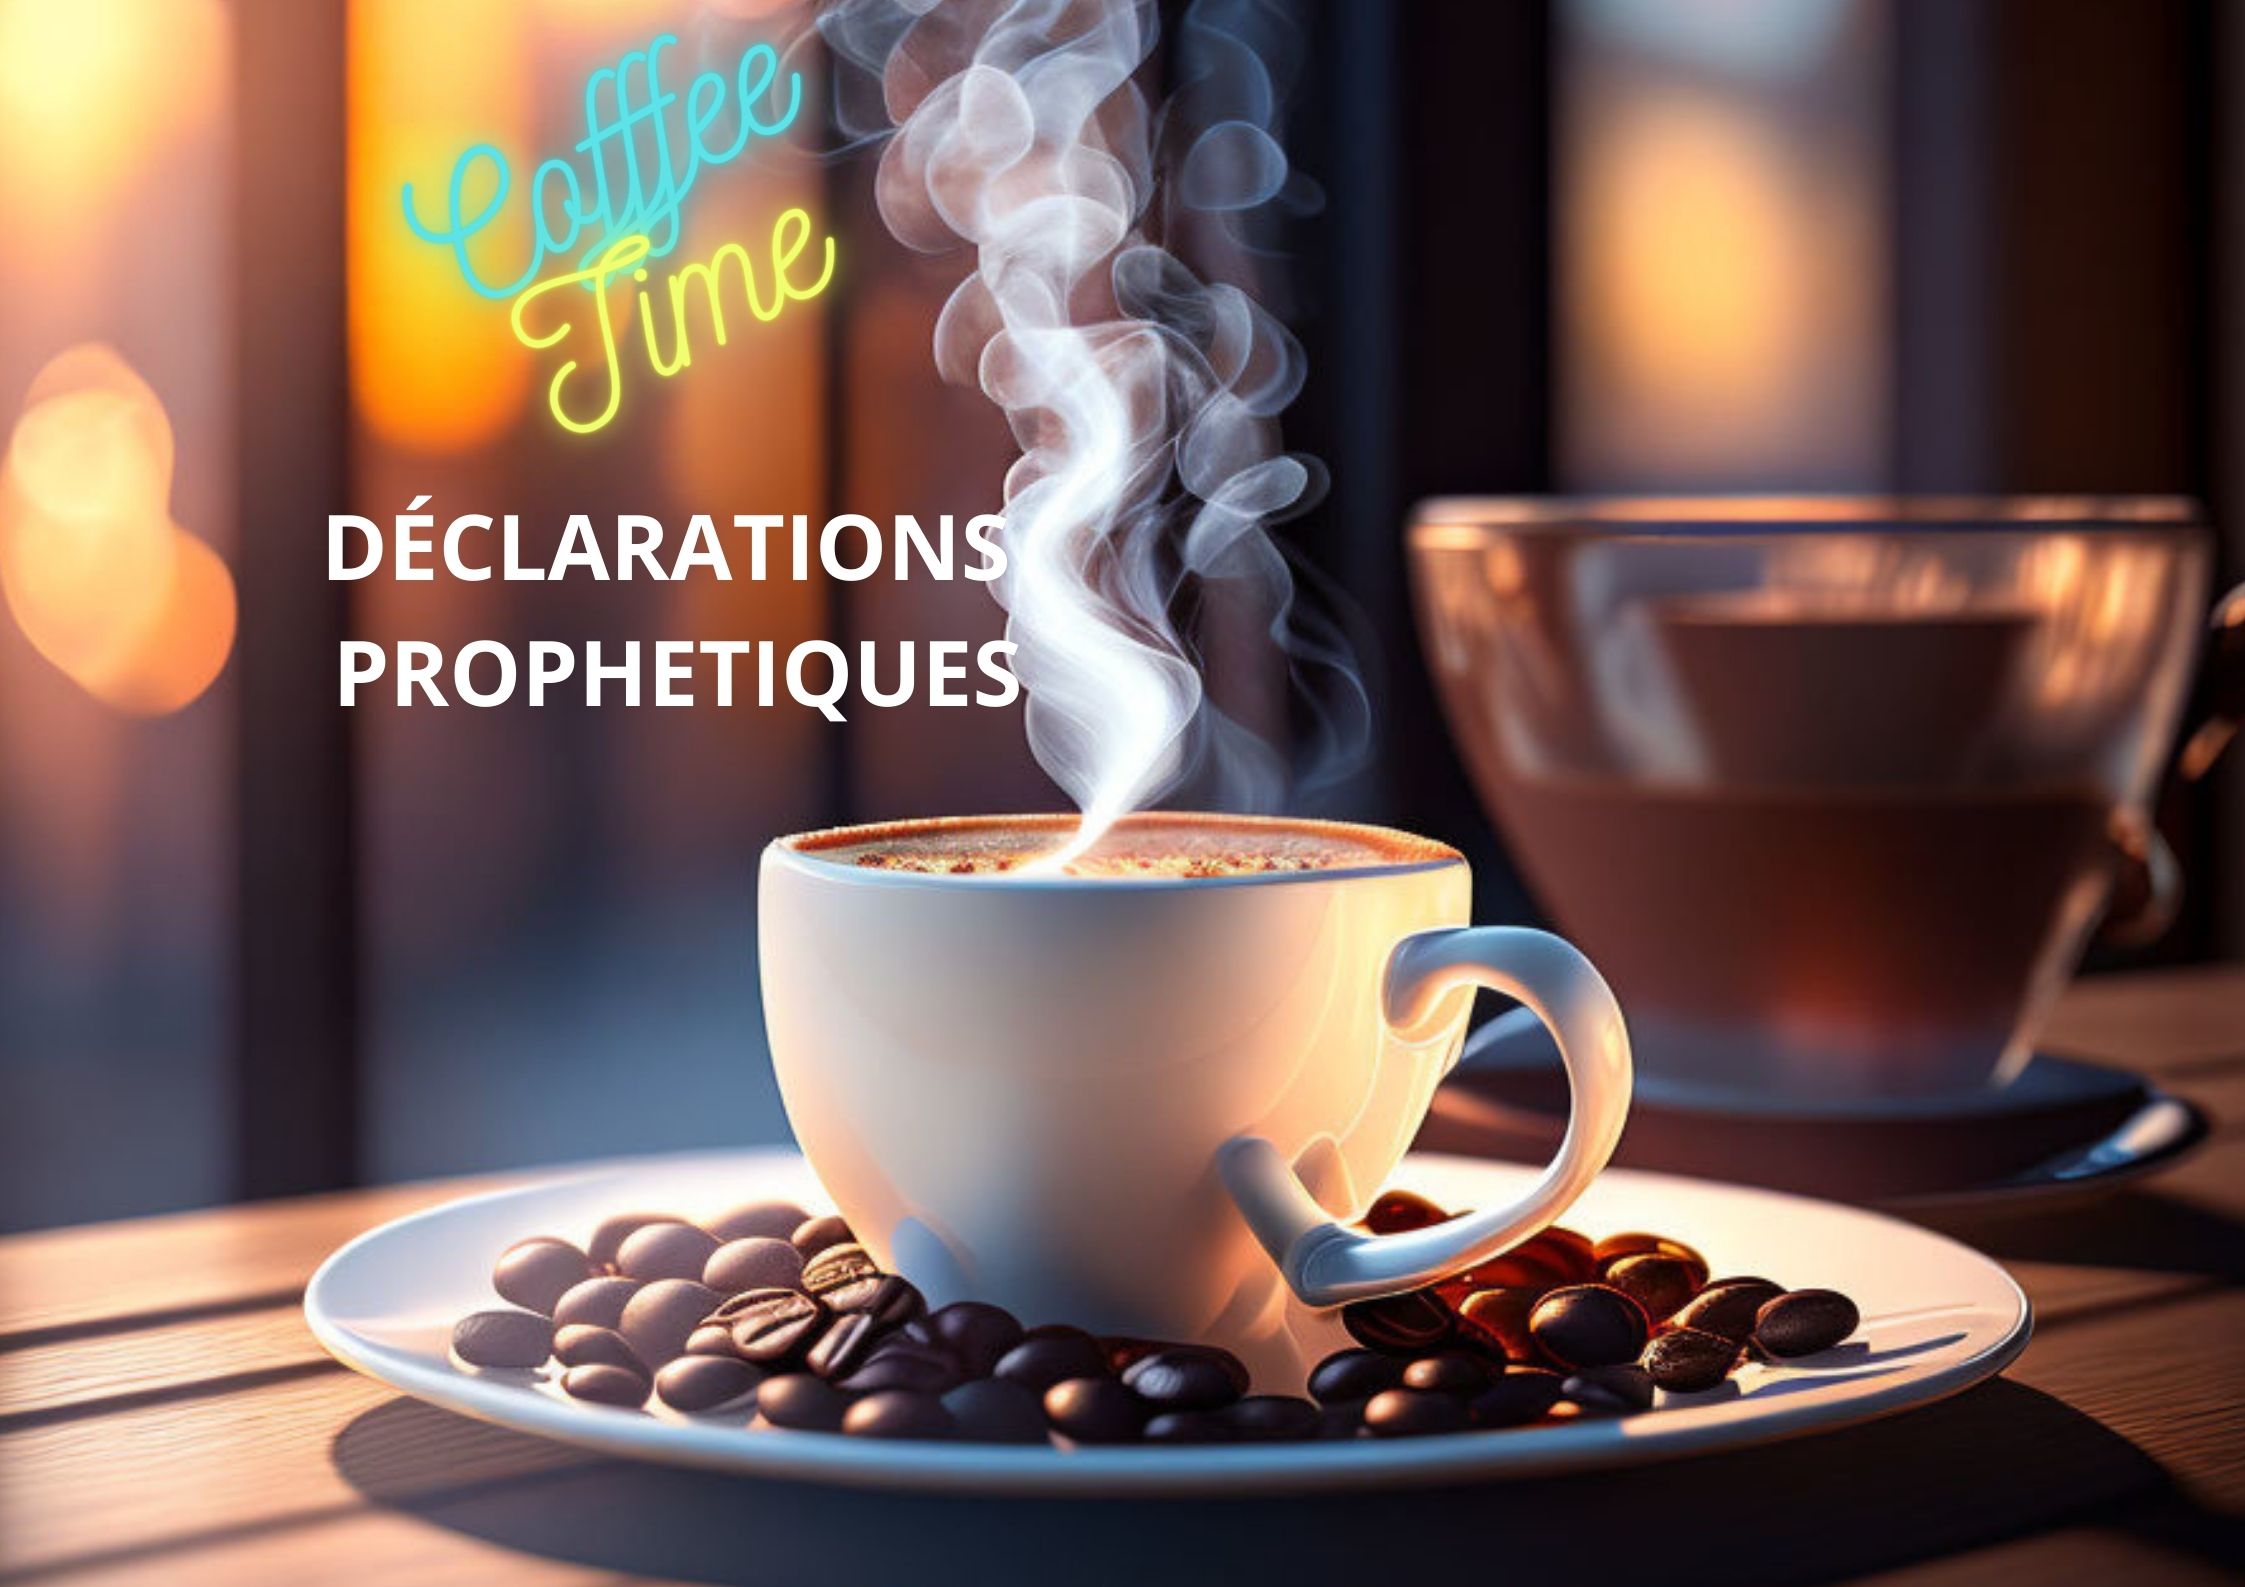 You are currently viewing LE COFFEE TIME – SOUFFLE DE VIE